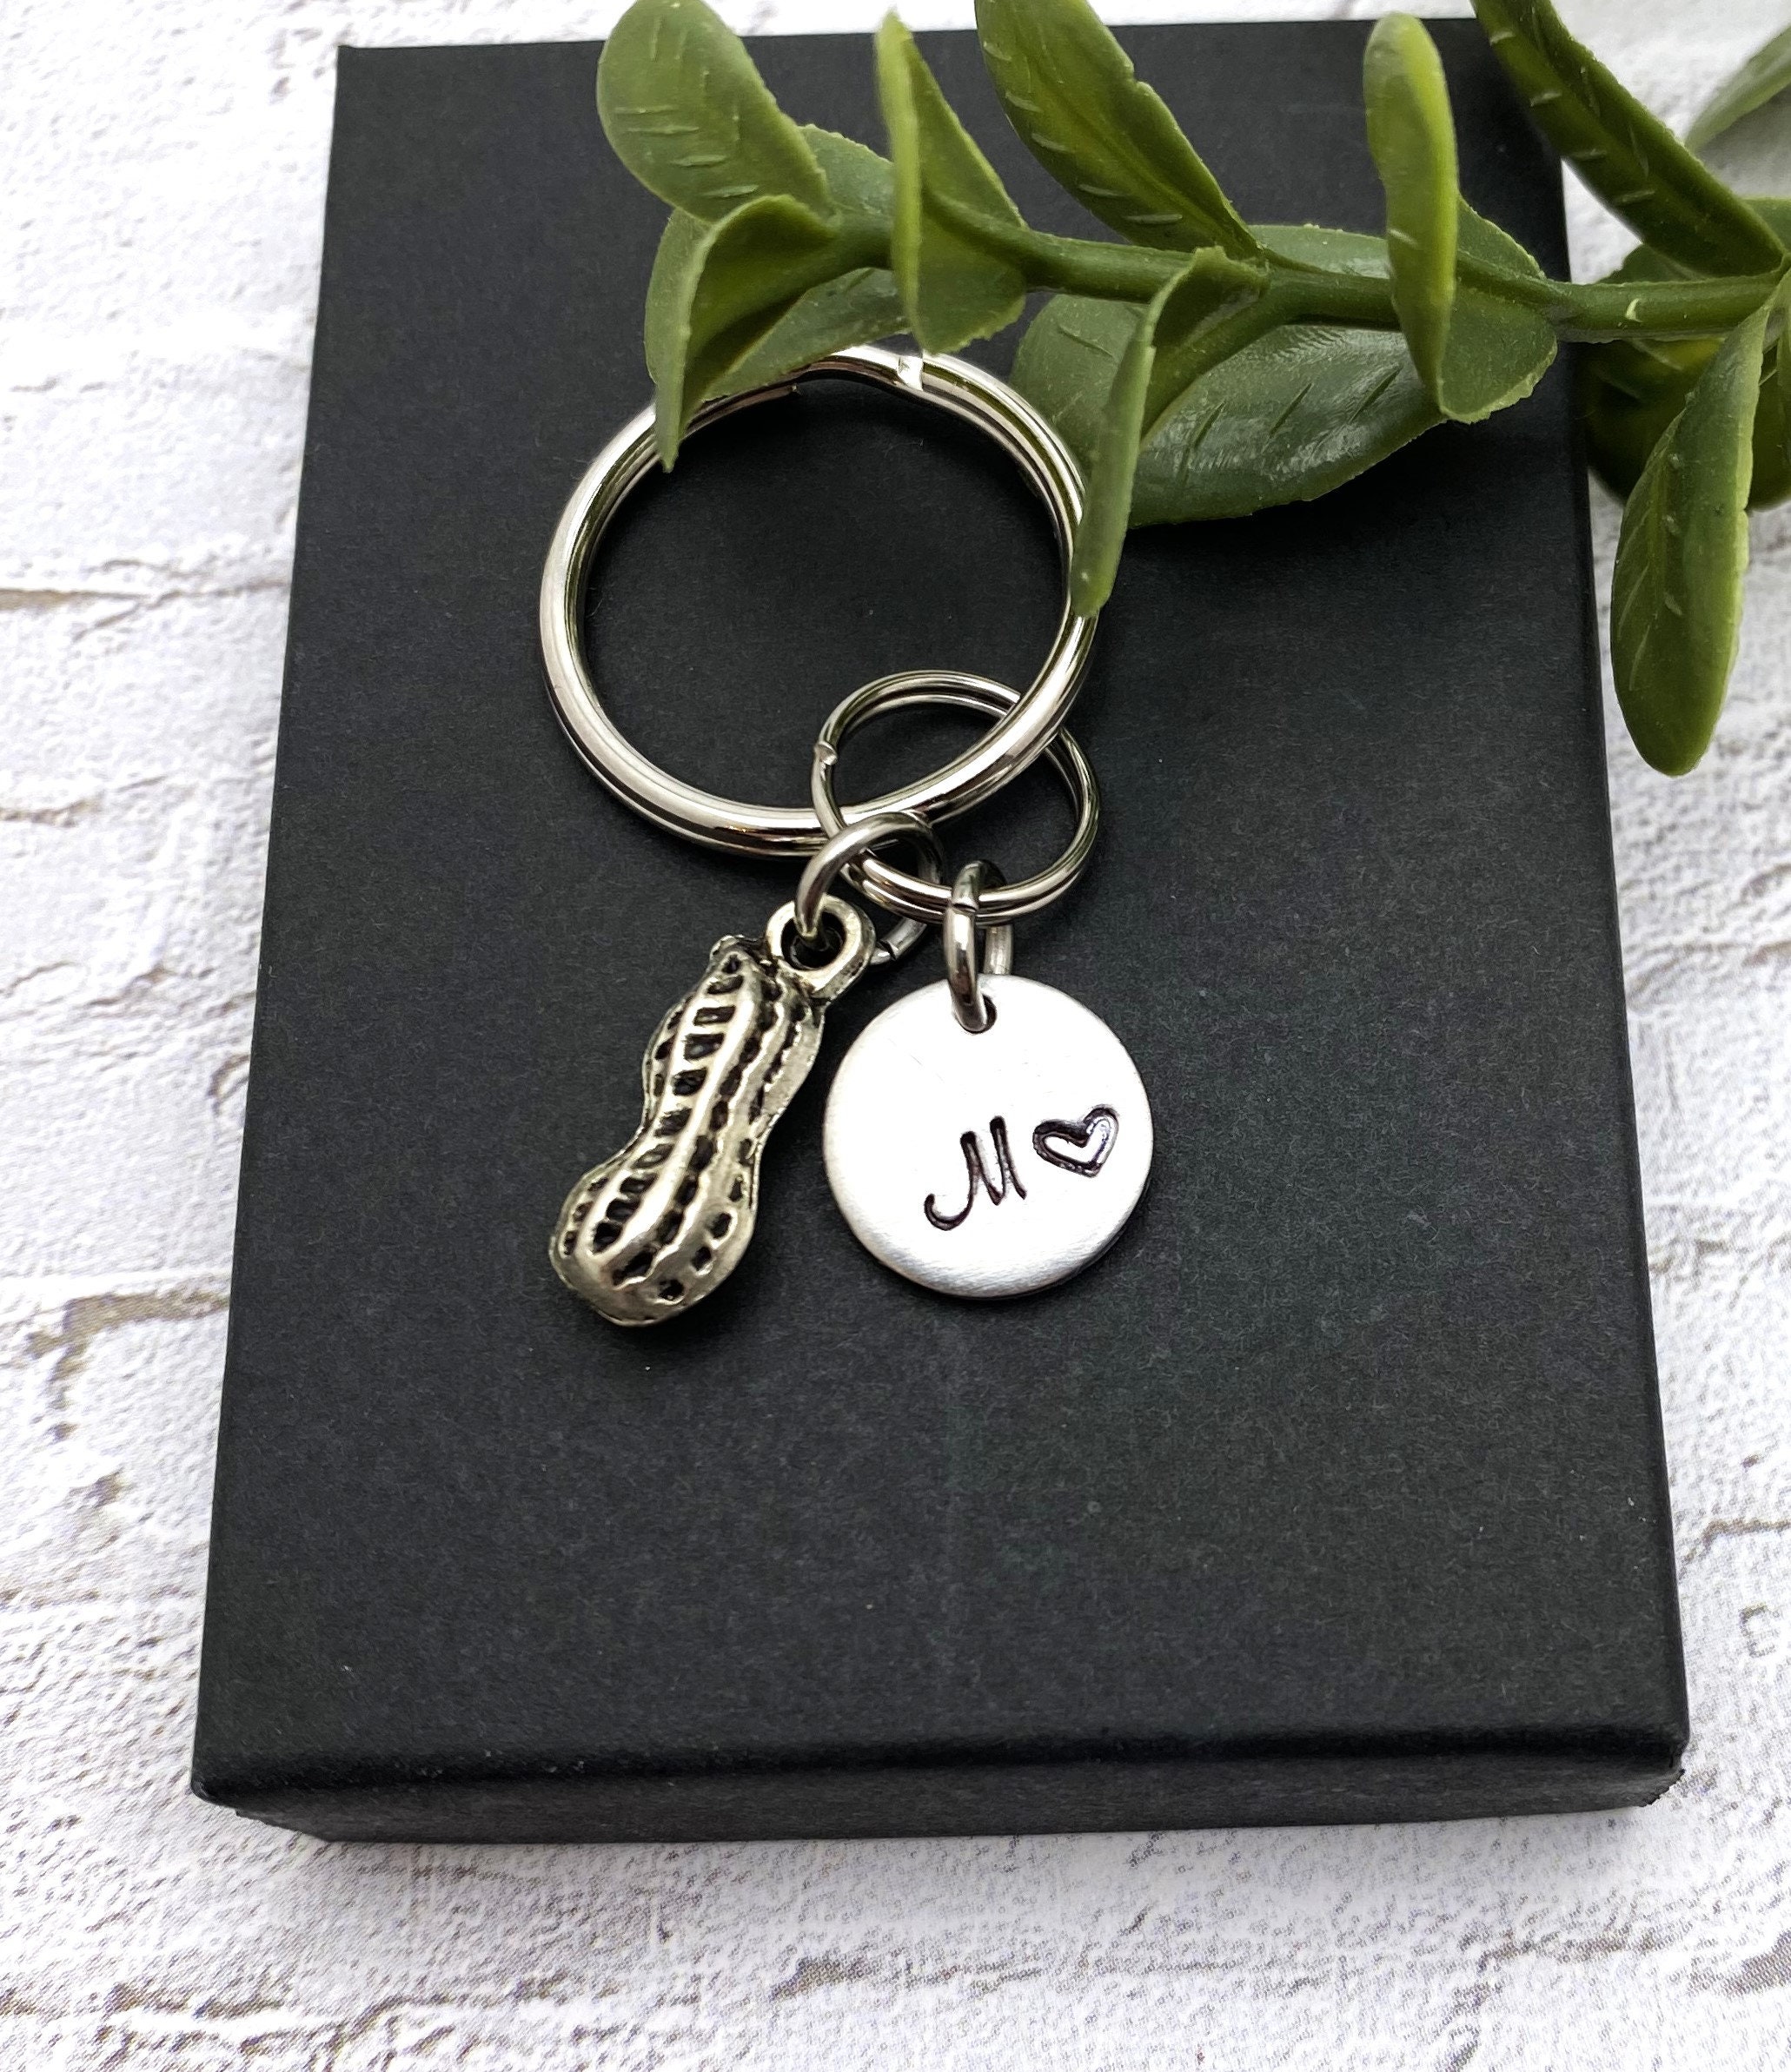 aandlengraving Personalized Silver Satin Polished Keychain, Engraved Silver Keychain, Two Tone Keychain, Silver Key Ring, Personalized Silver Keychain